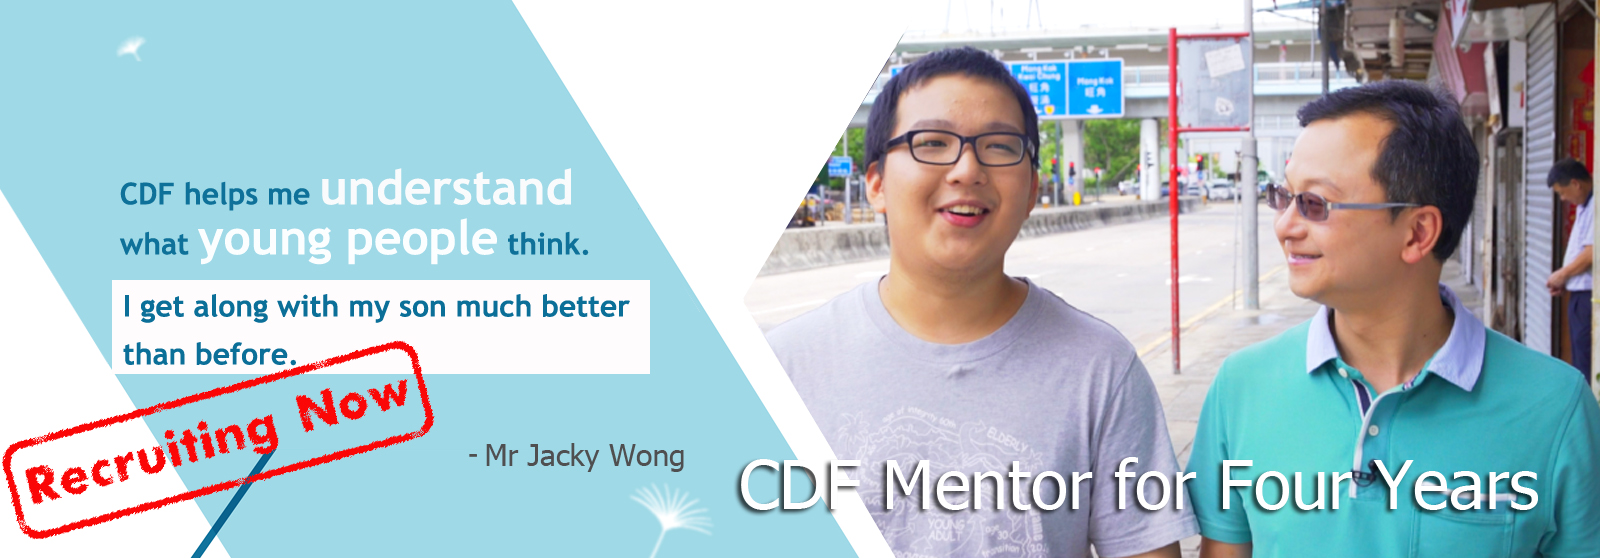 CDF Mentor for Four Years - Mr Jacky Wong